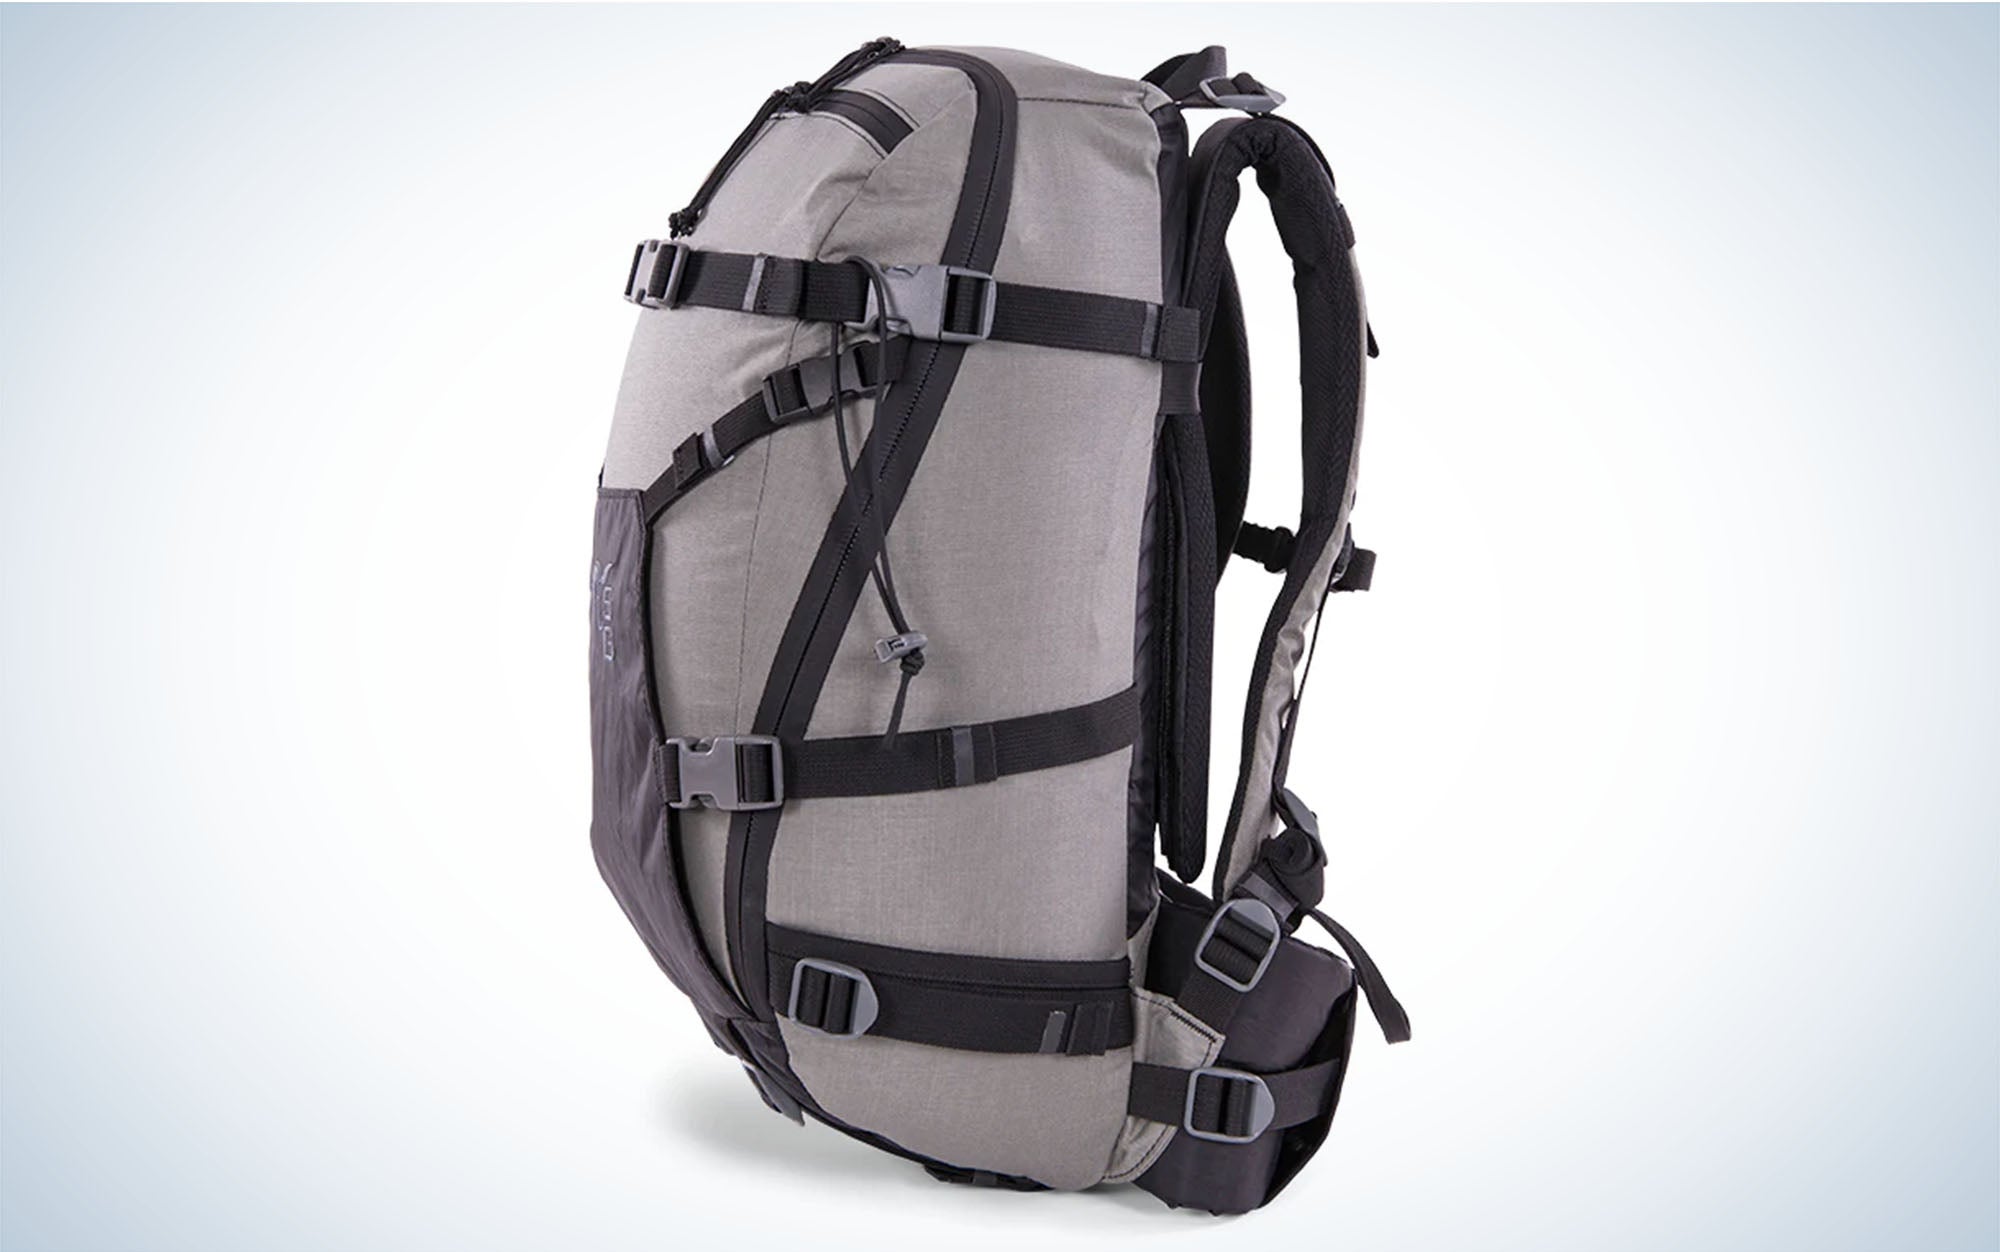 the Stone Glacier Avail is the best day pack for women.